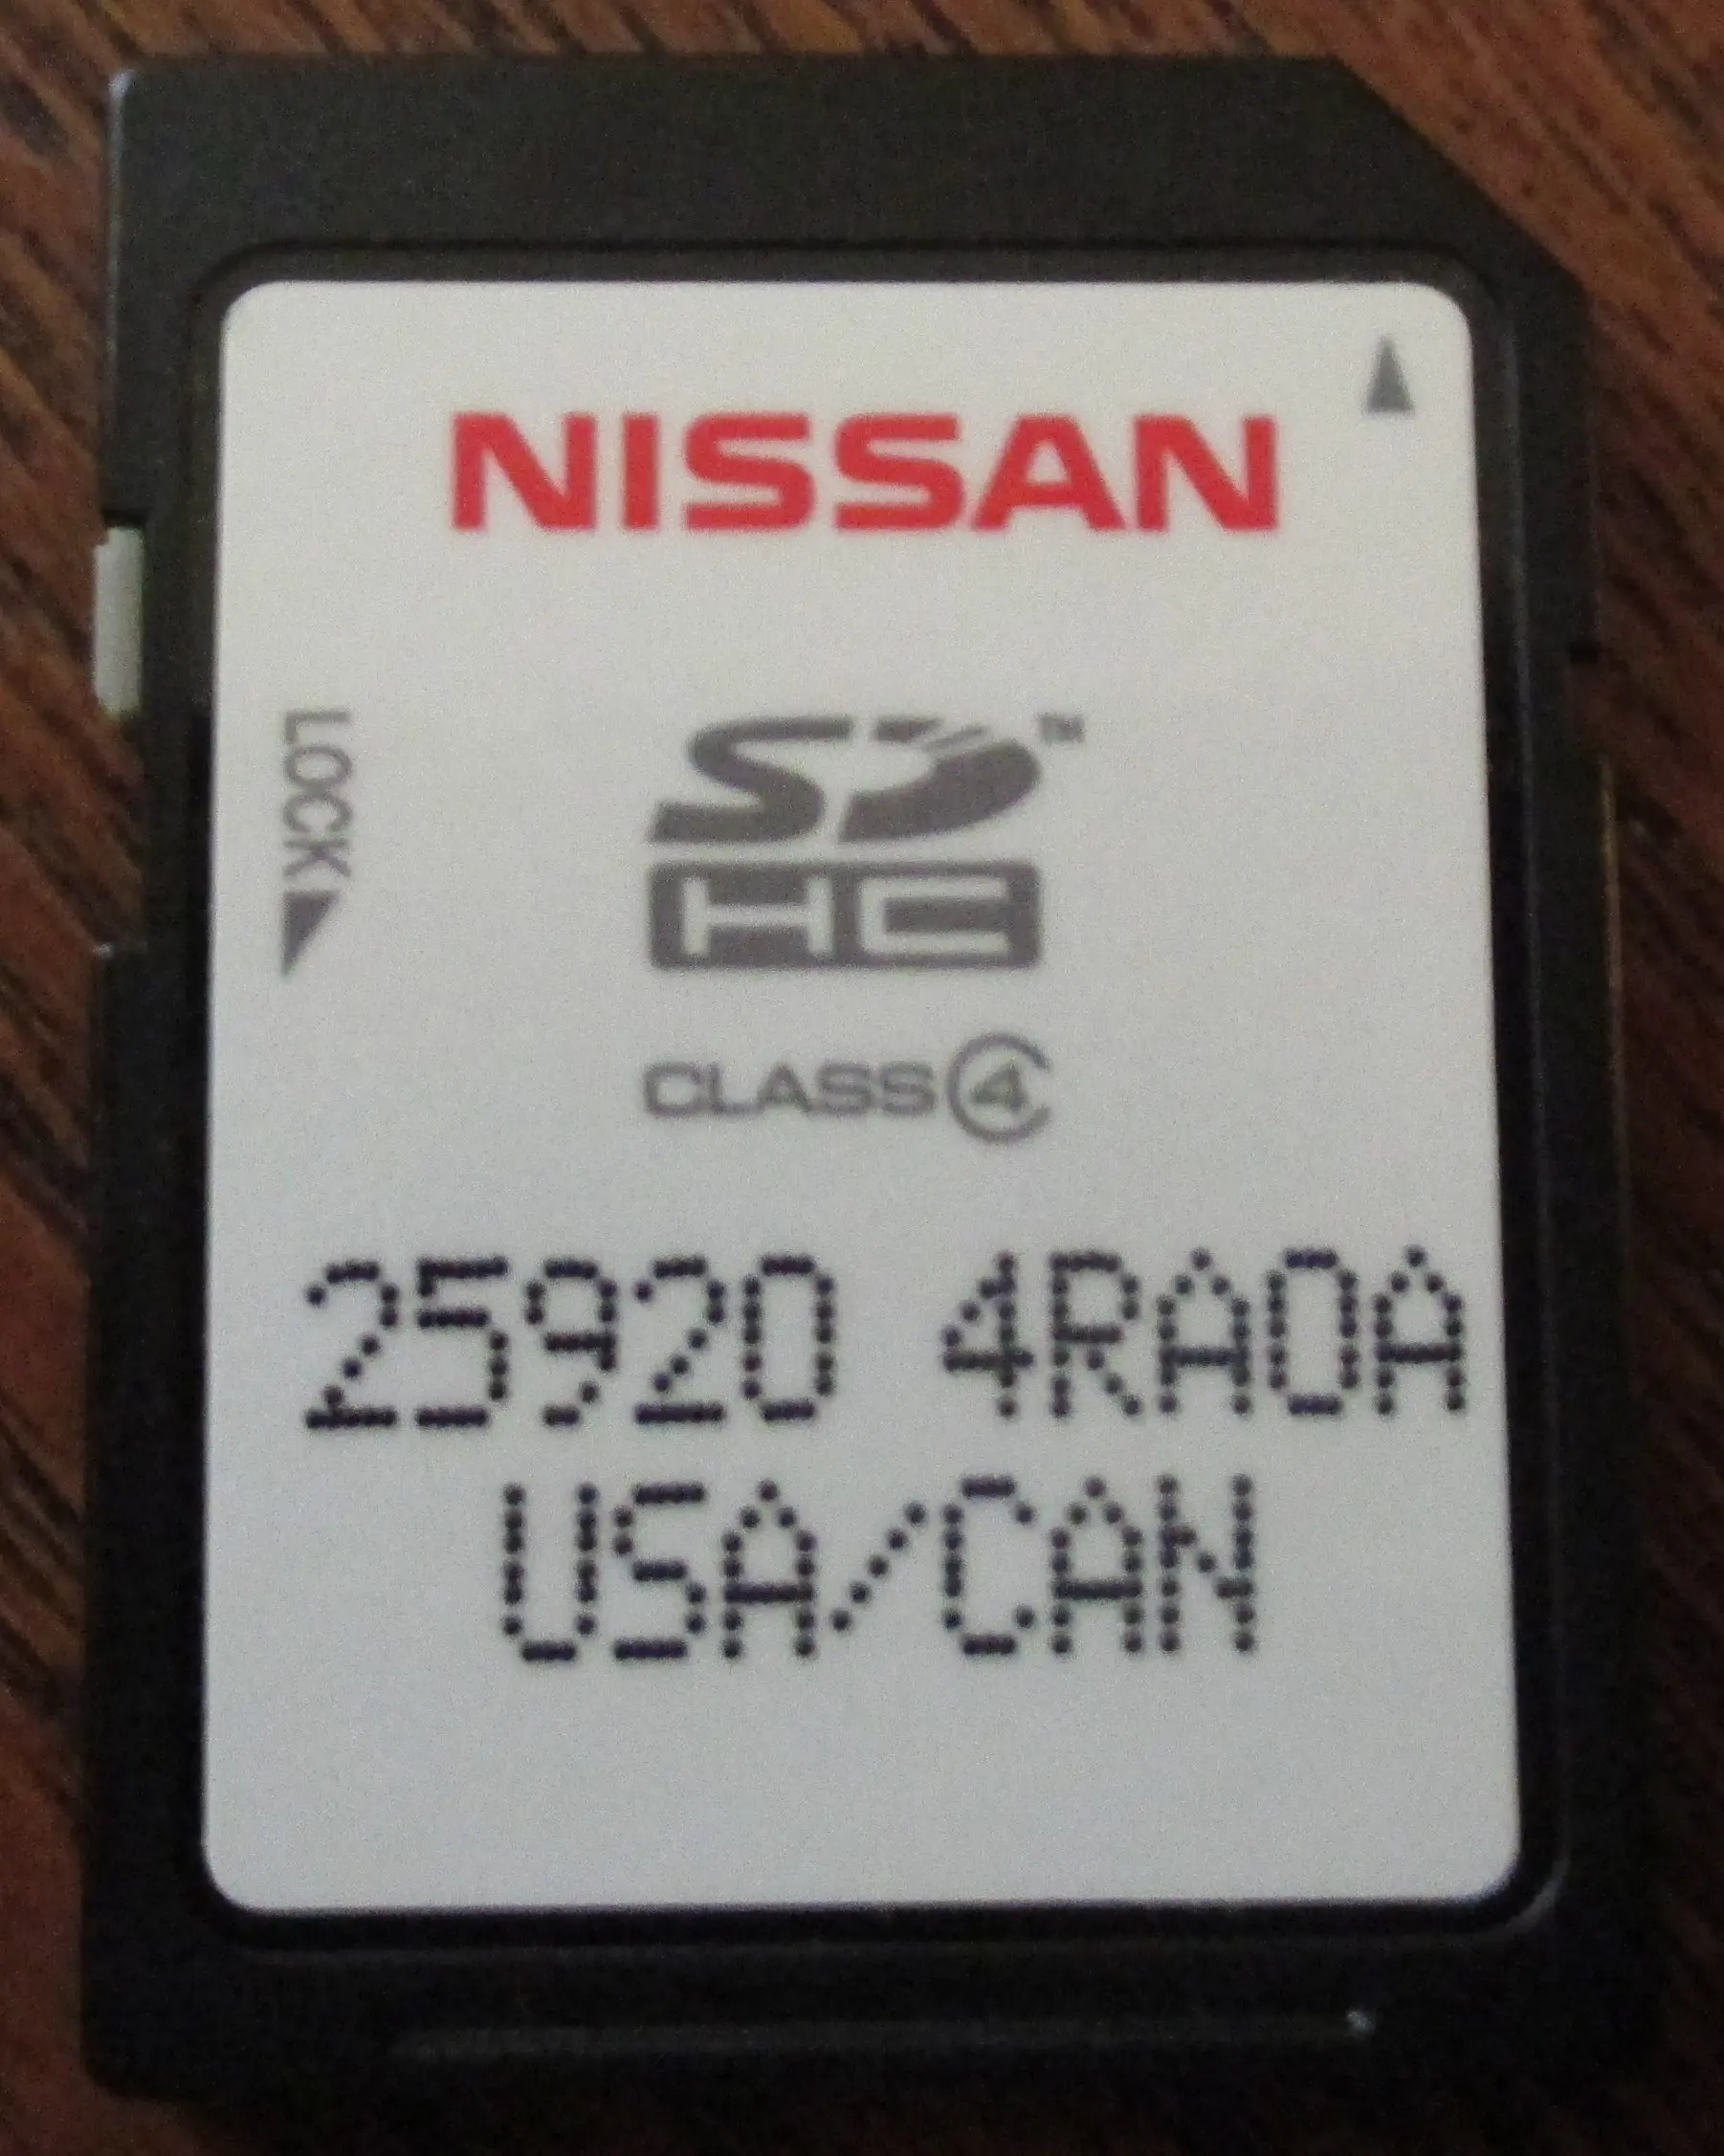 nissan map sd card not working